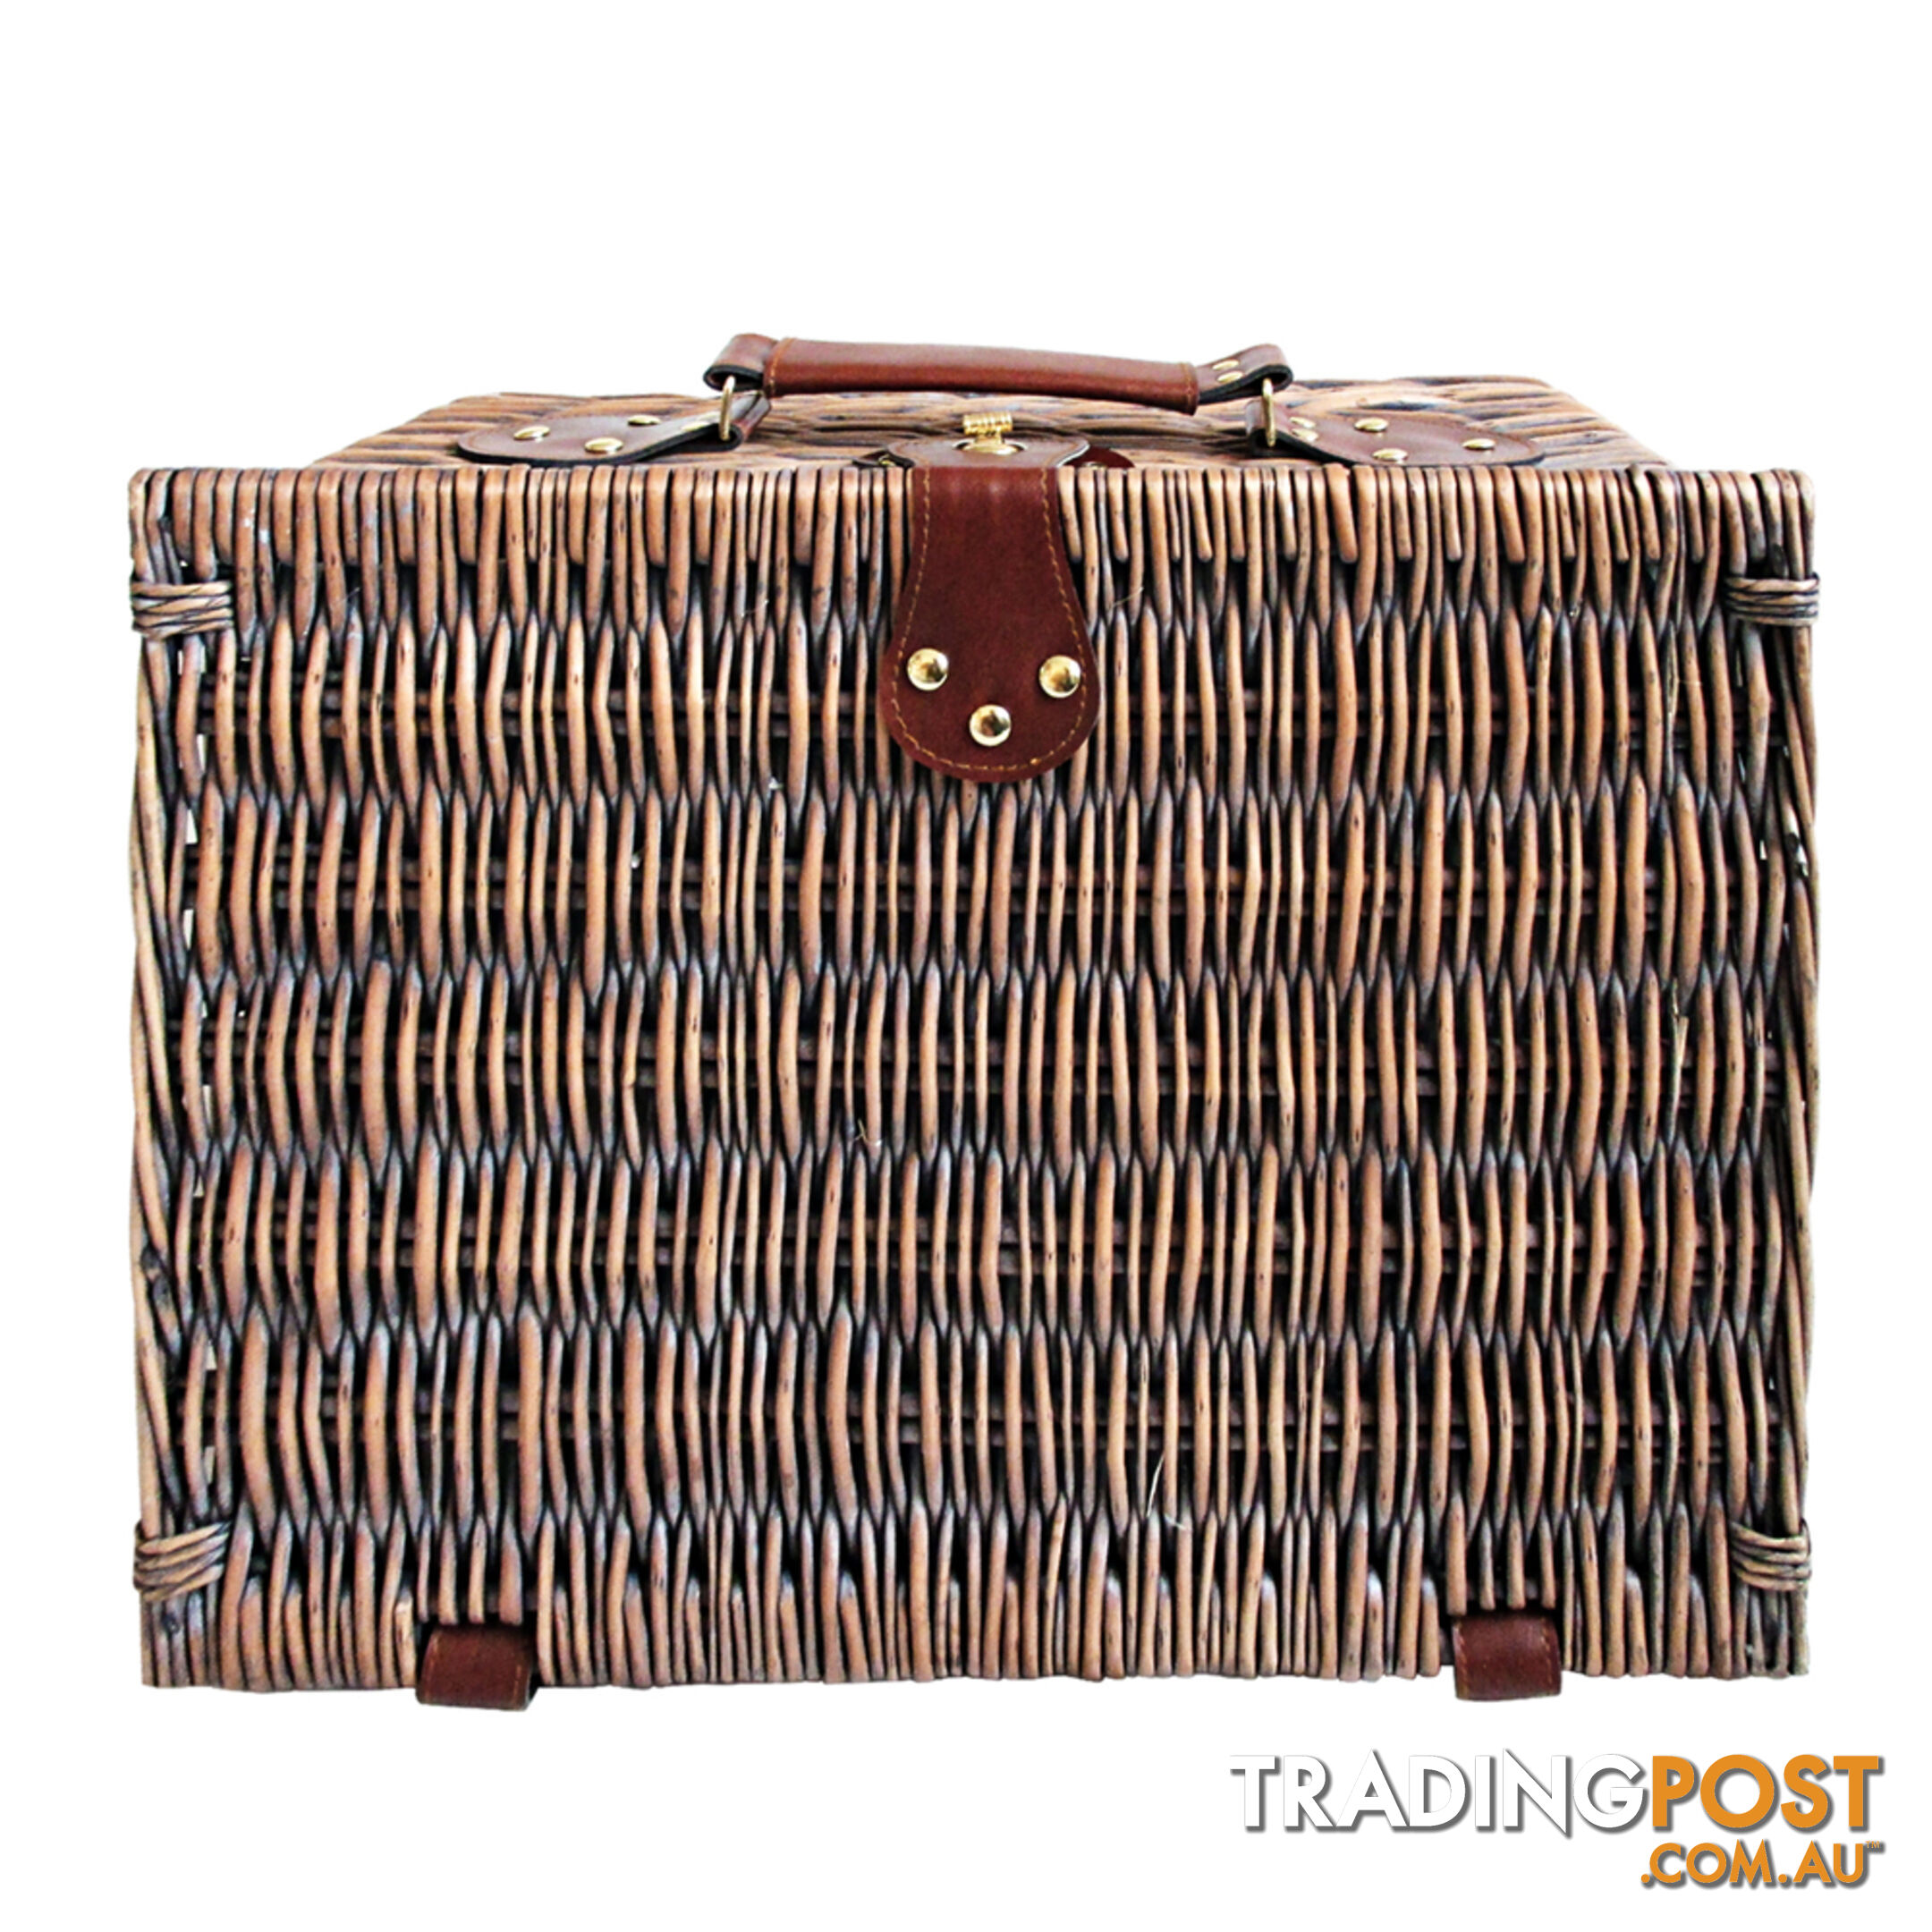 4 Person Picnic Basket Set With Blanket Brown